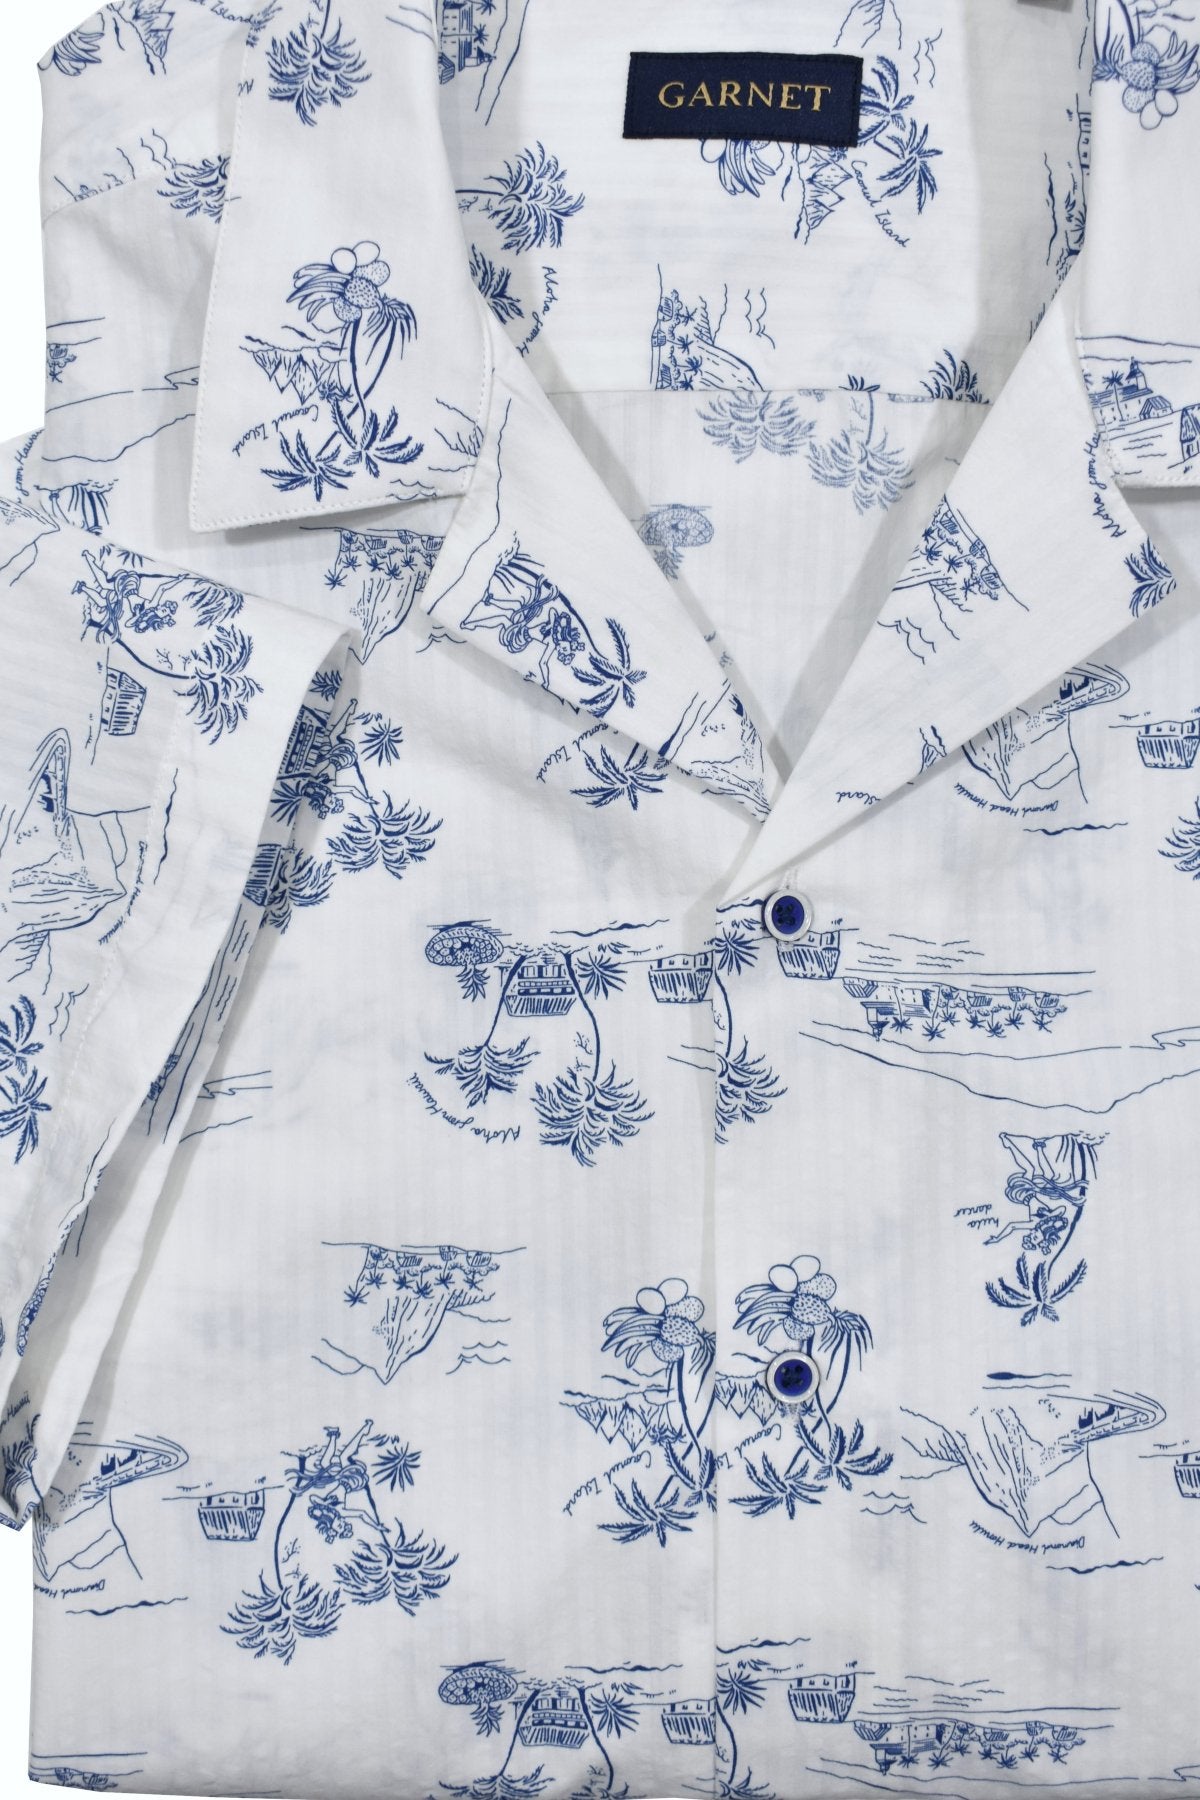 Relax and dream away in a cool casual lifestyle. Made with soft white cotton seersucker fabric and a matching island motif print in warm blue, this shirt brings a cool and comfortable look. Its pajama top collar adds to the relaxed fit, making it perfect for your island getaway.